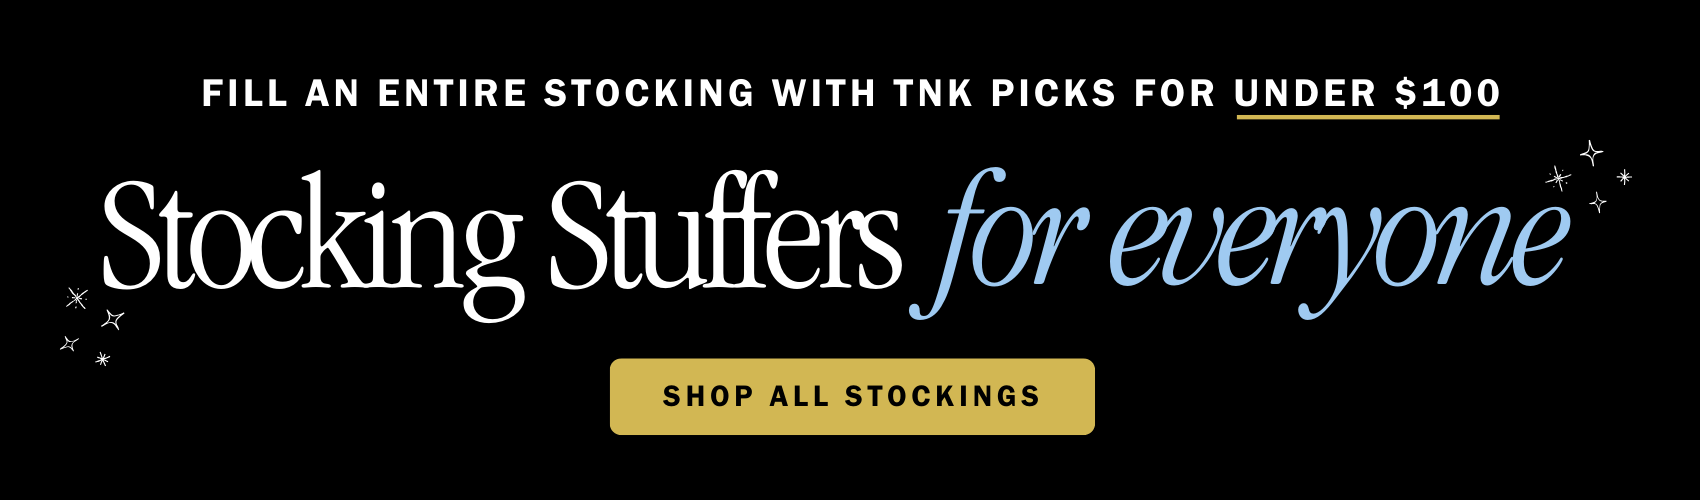 A banner for stocking stuffers for everyone.